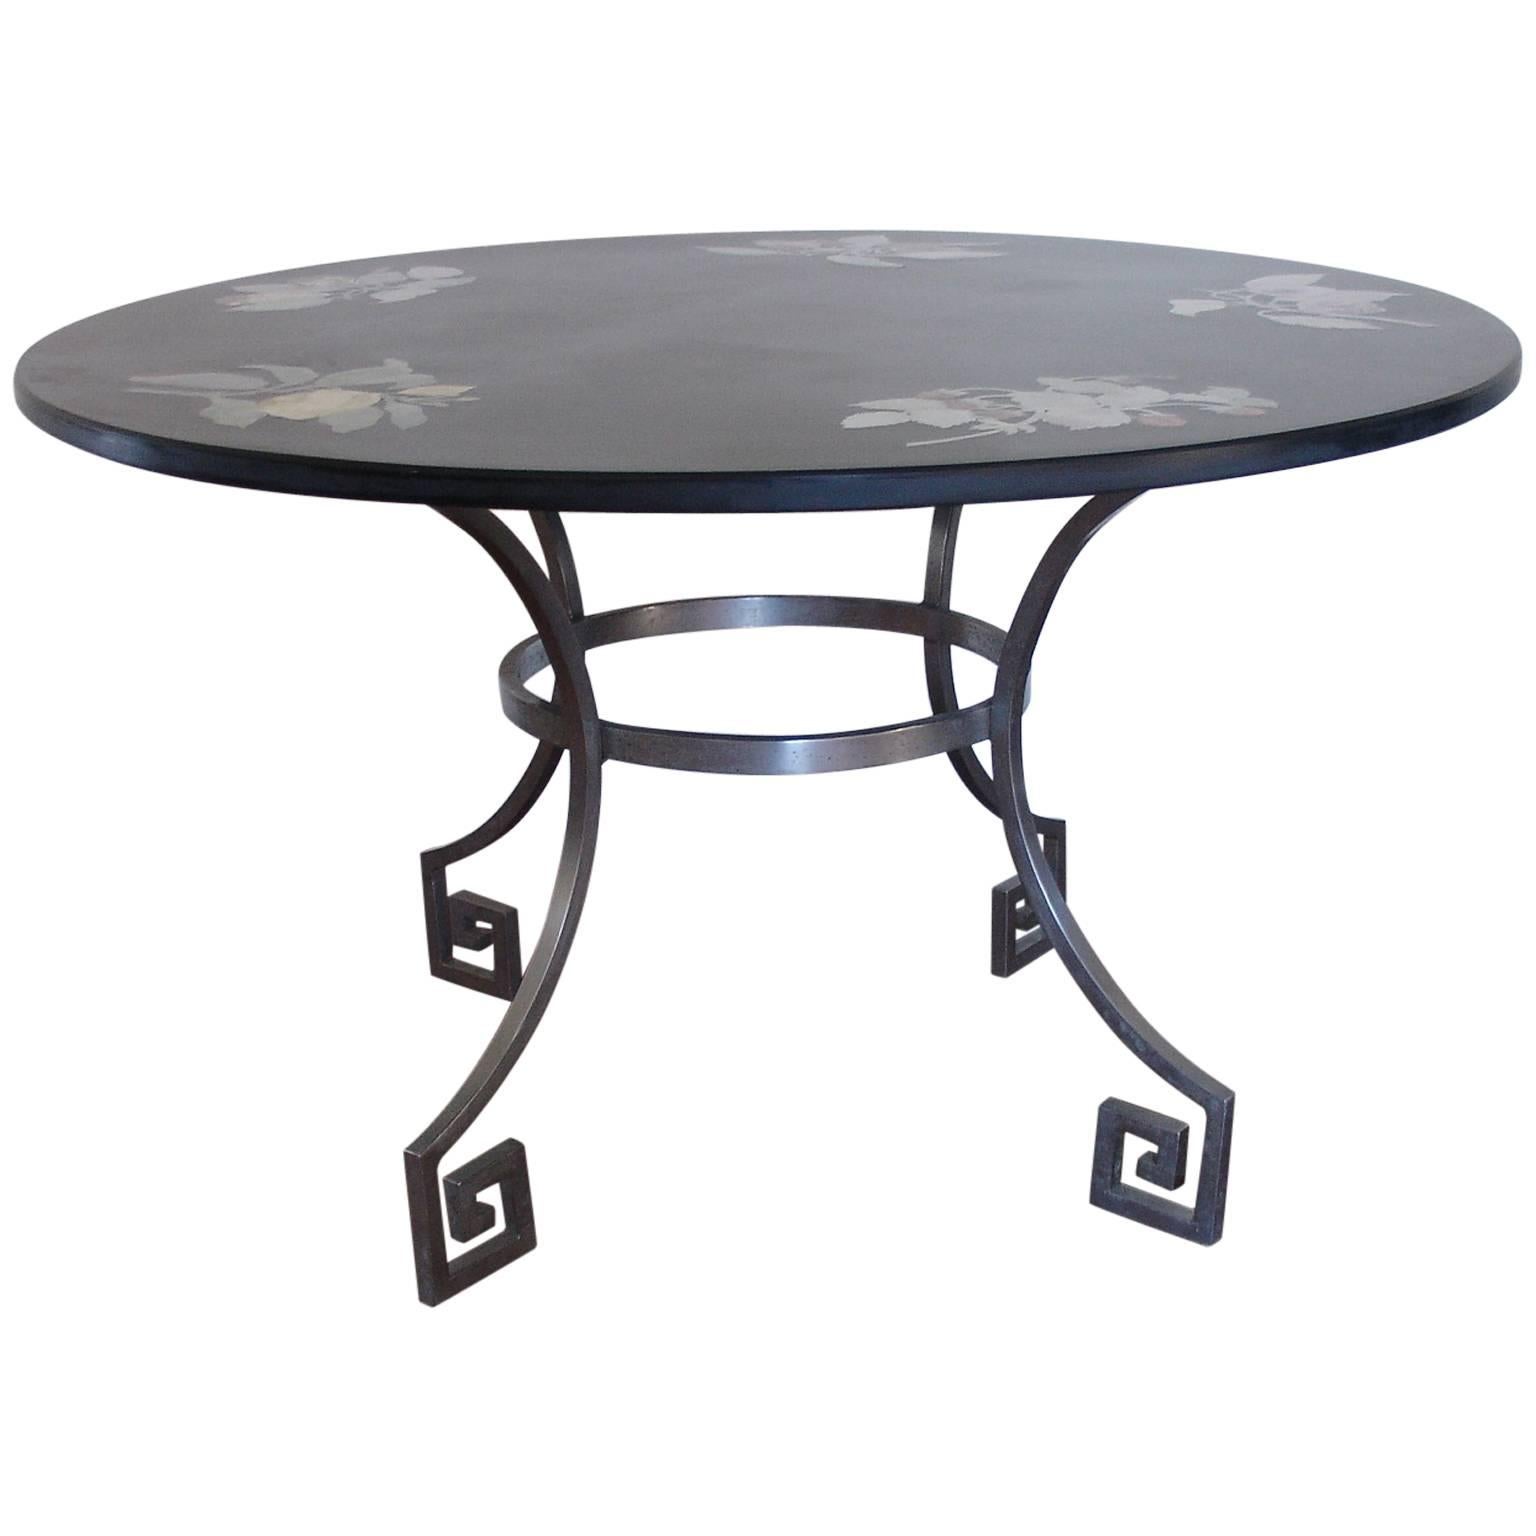 Polished Slate Top Table with Inset Flower Motifs on Steel Base, Italian, 1961